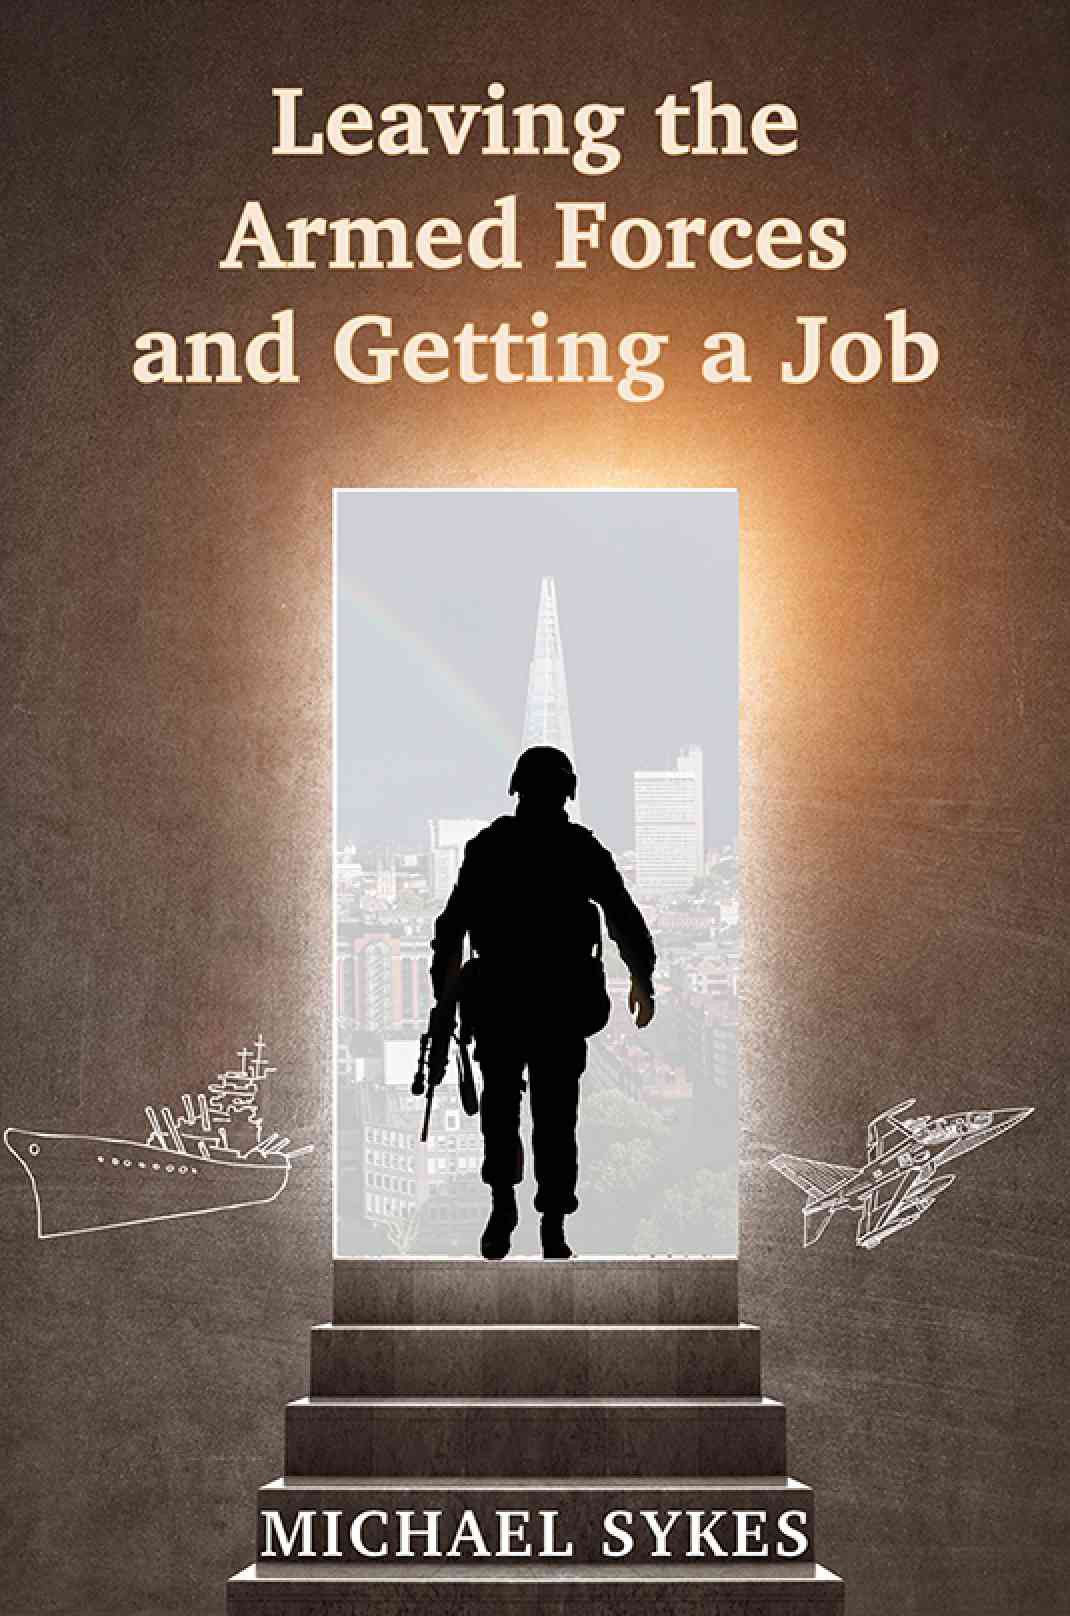 ‘Leaving the Armed Forces and Getting a Job’ by Michael Sykes Featured on a Website